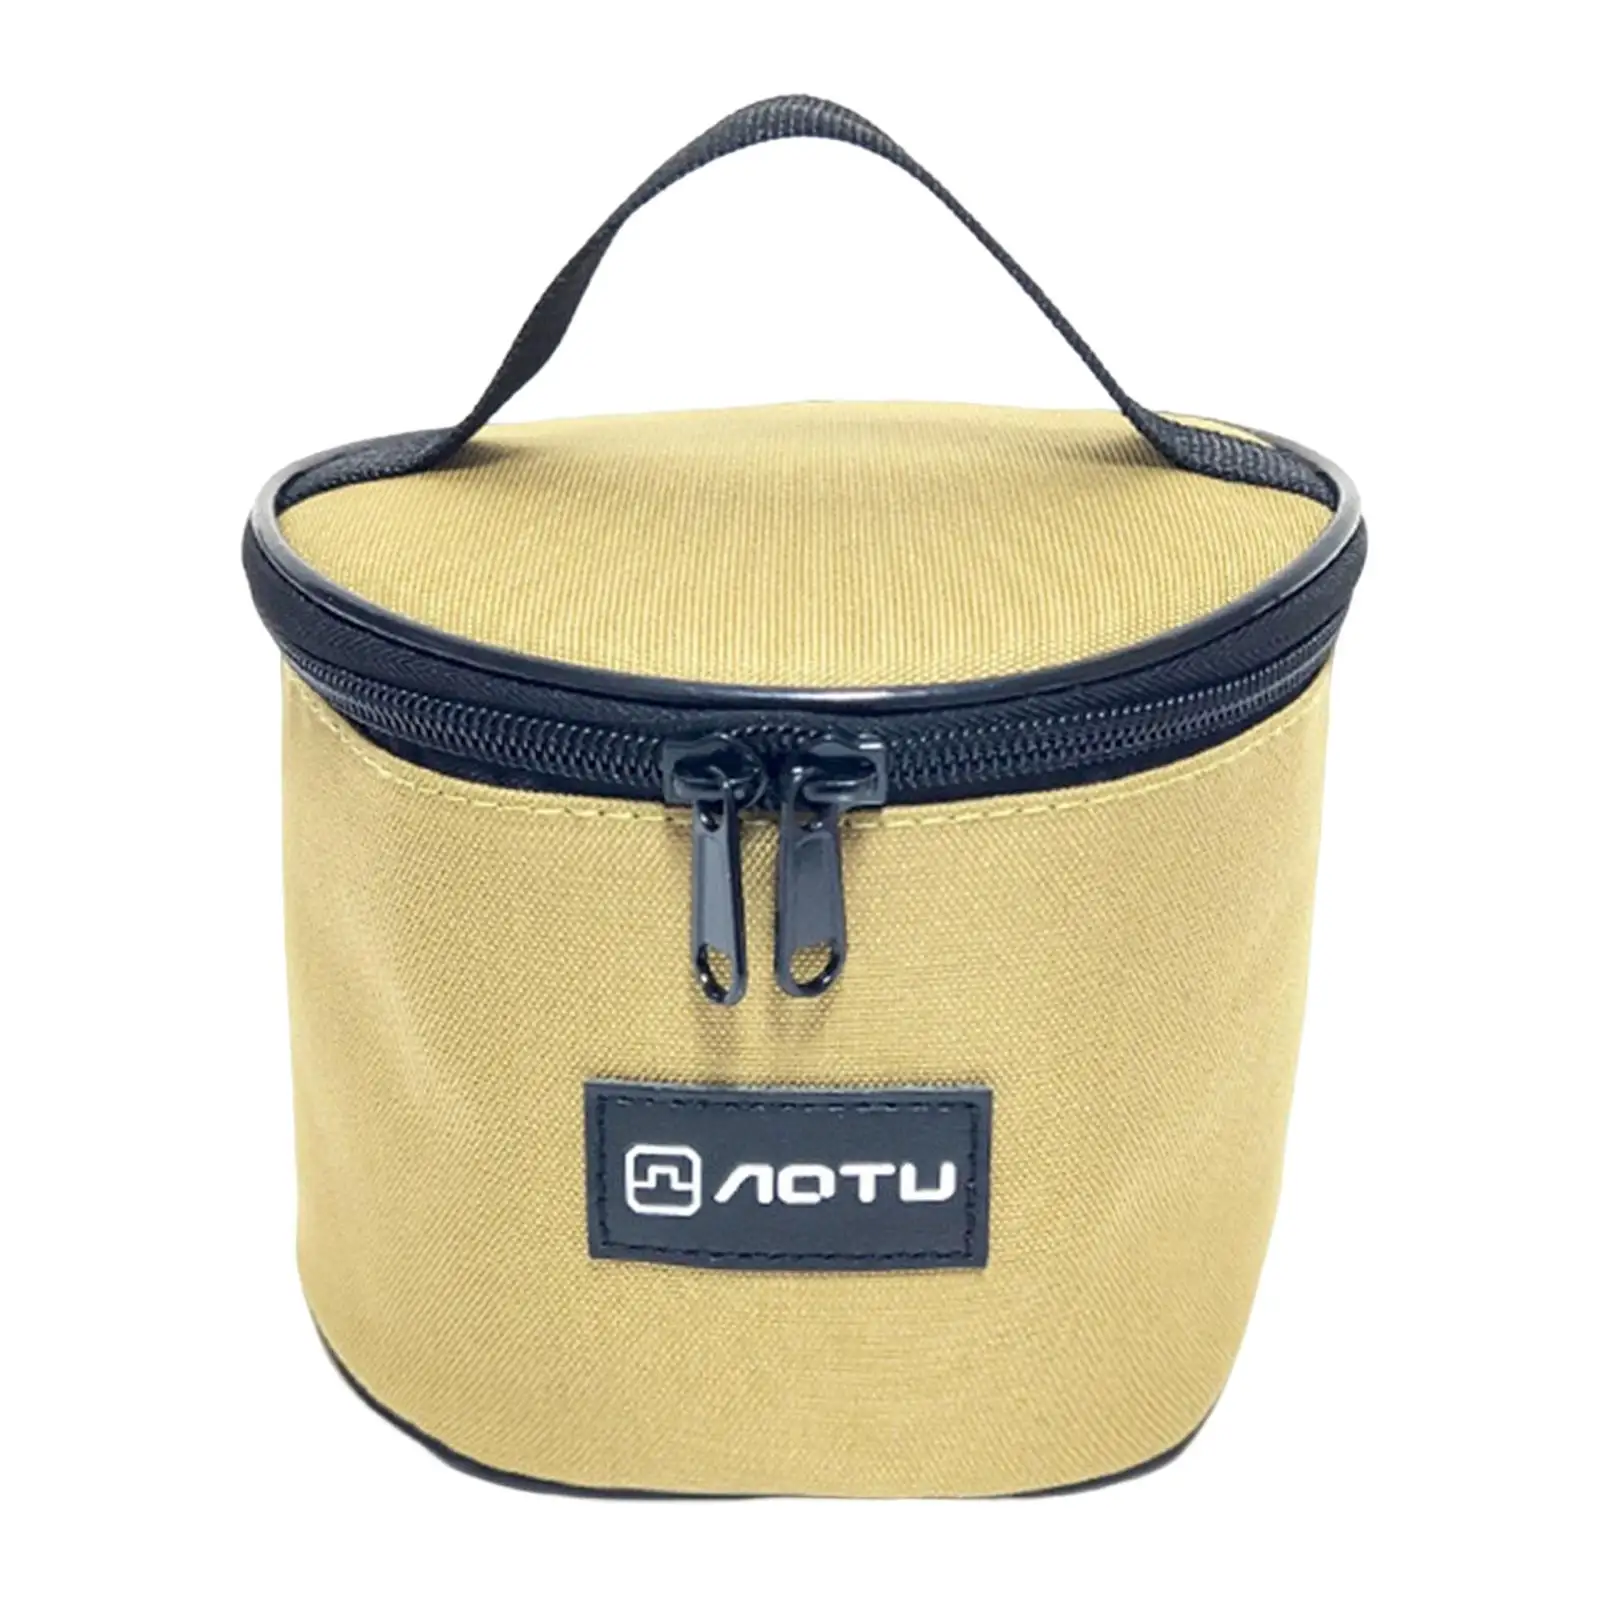 Outdoor Bowl Storage Bag Carry Case Hiking with Handle Travel Picnic Cutlery